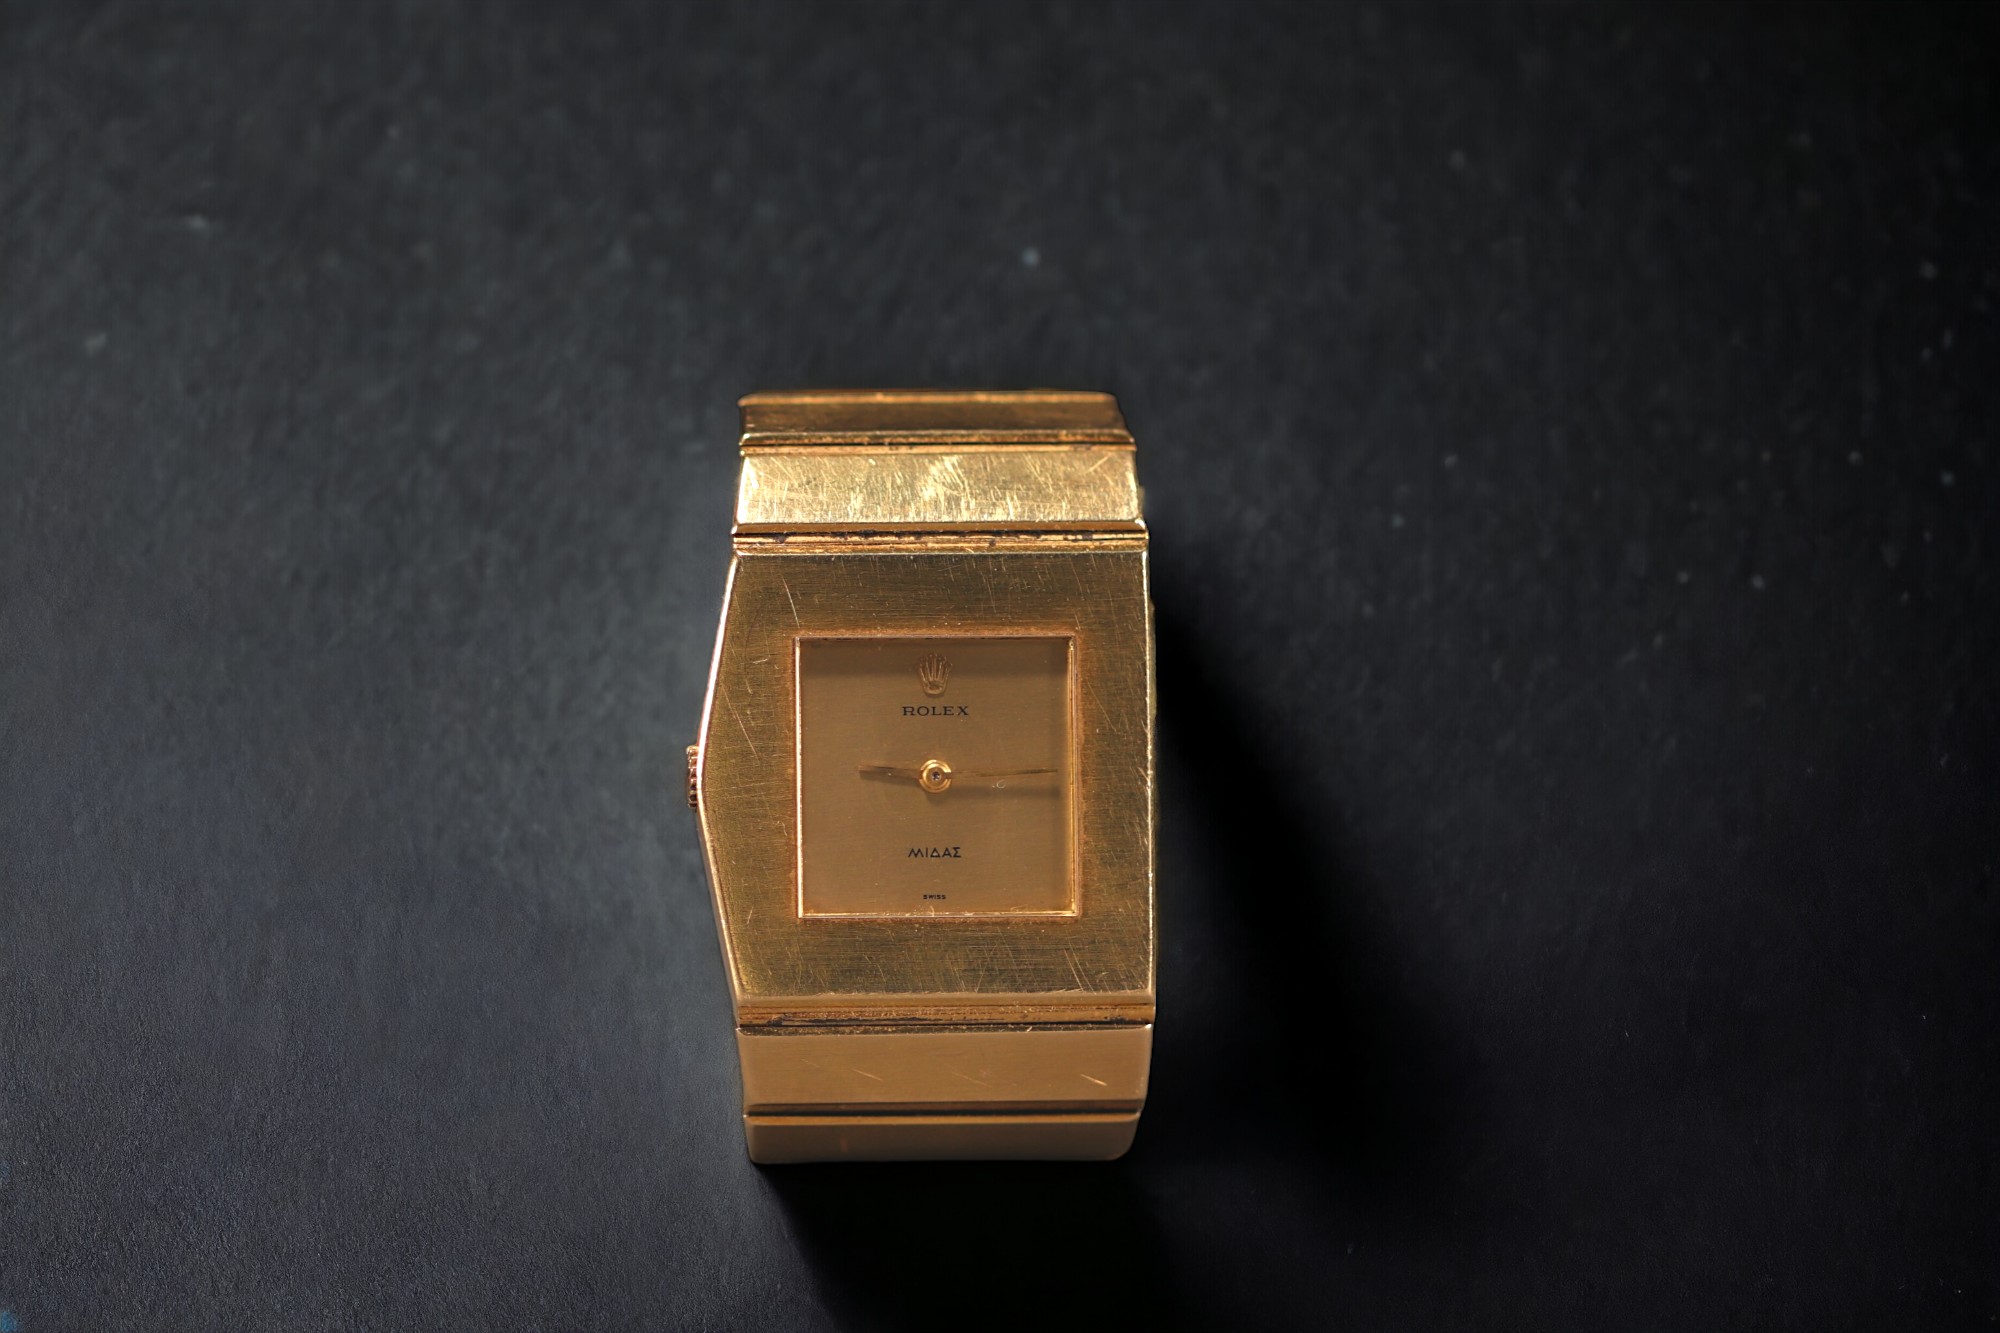 Rolex "King Midas" - Mechanical watch, case and bracelet in 18K yellow gold, ref 9630, calibre 650.  - Image 5 of 7